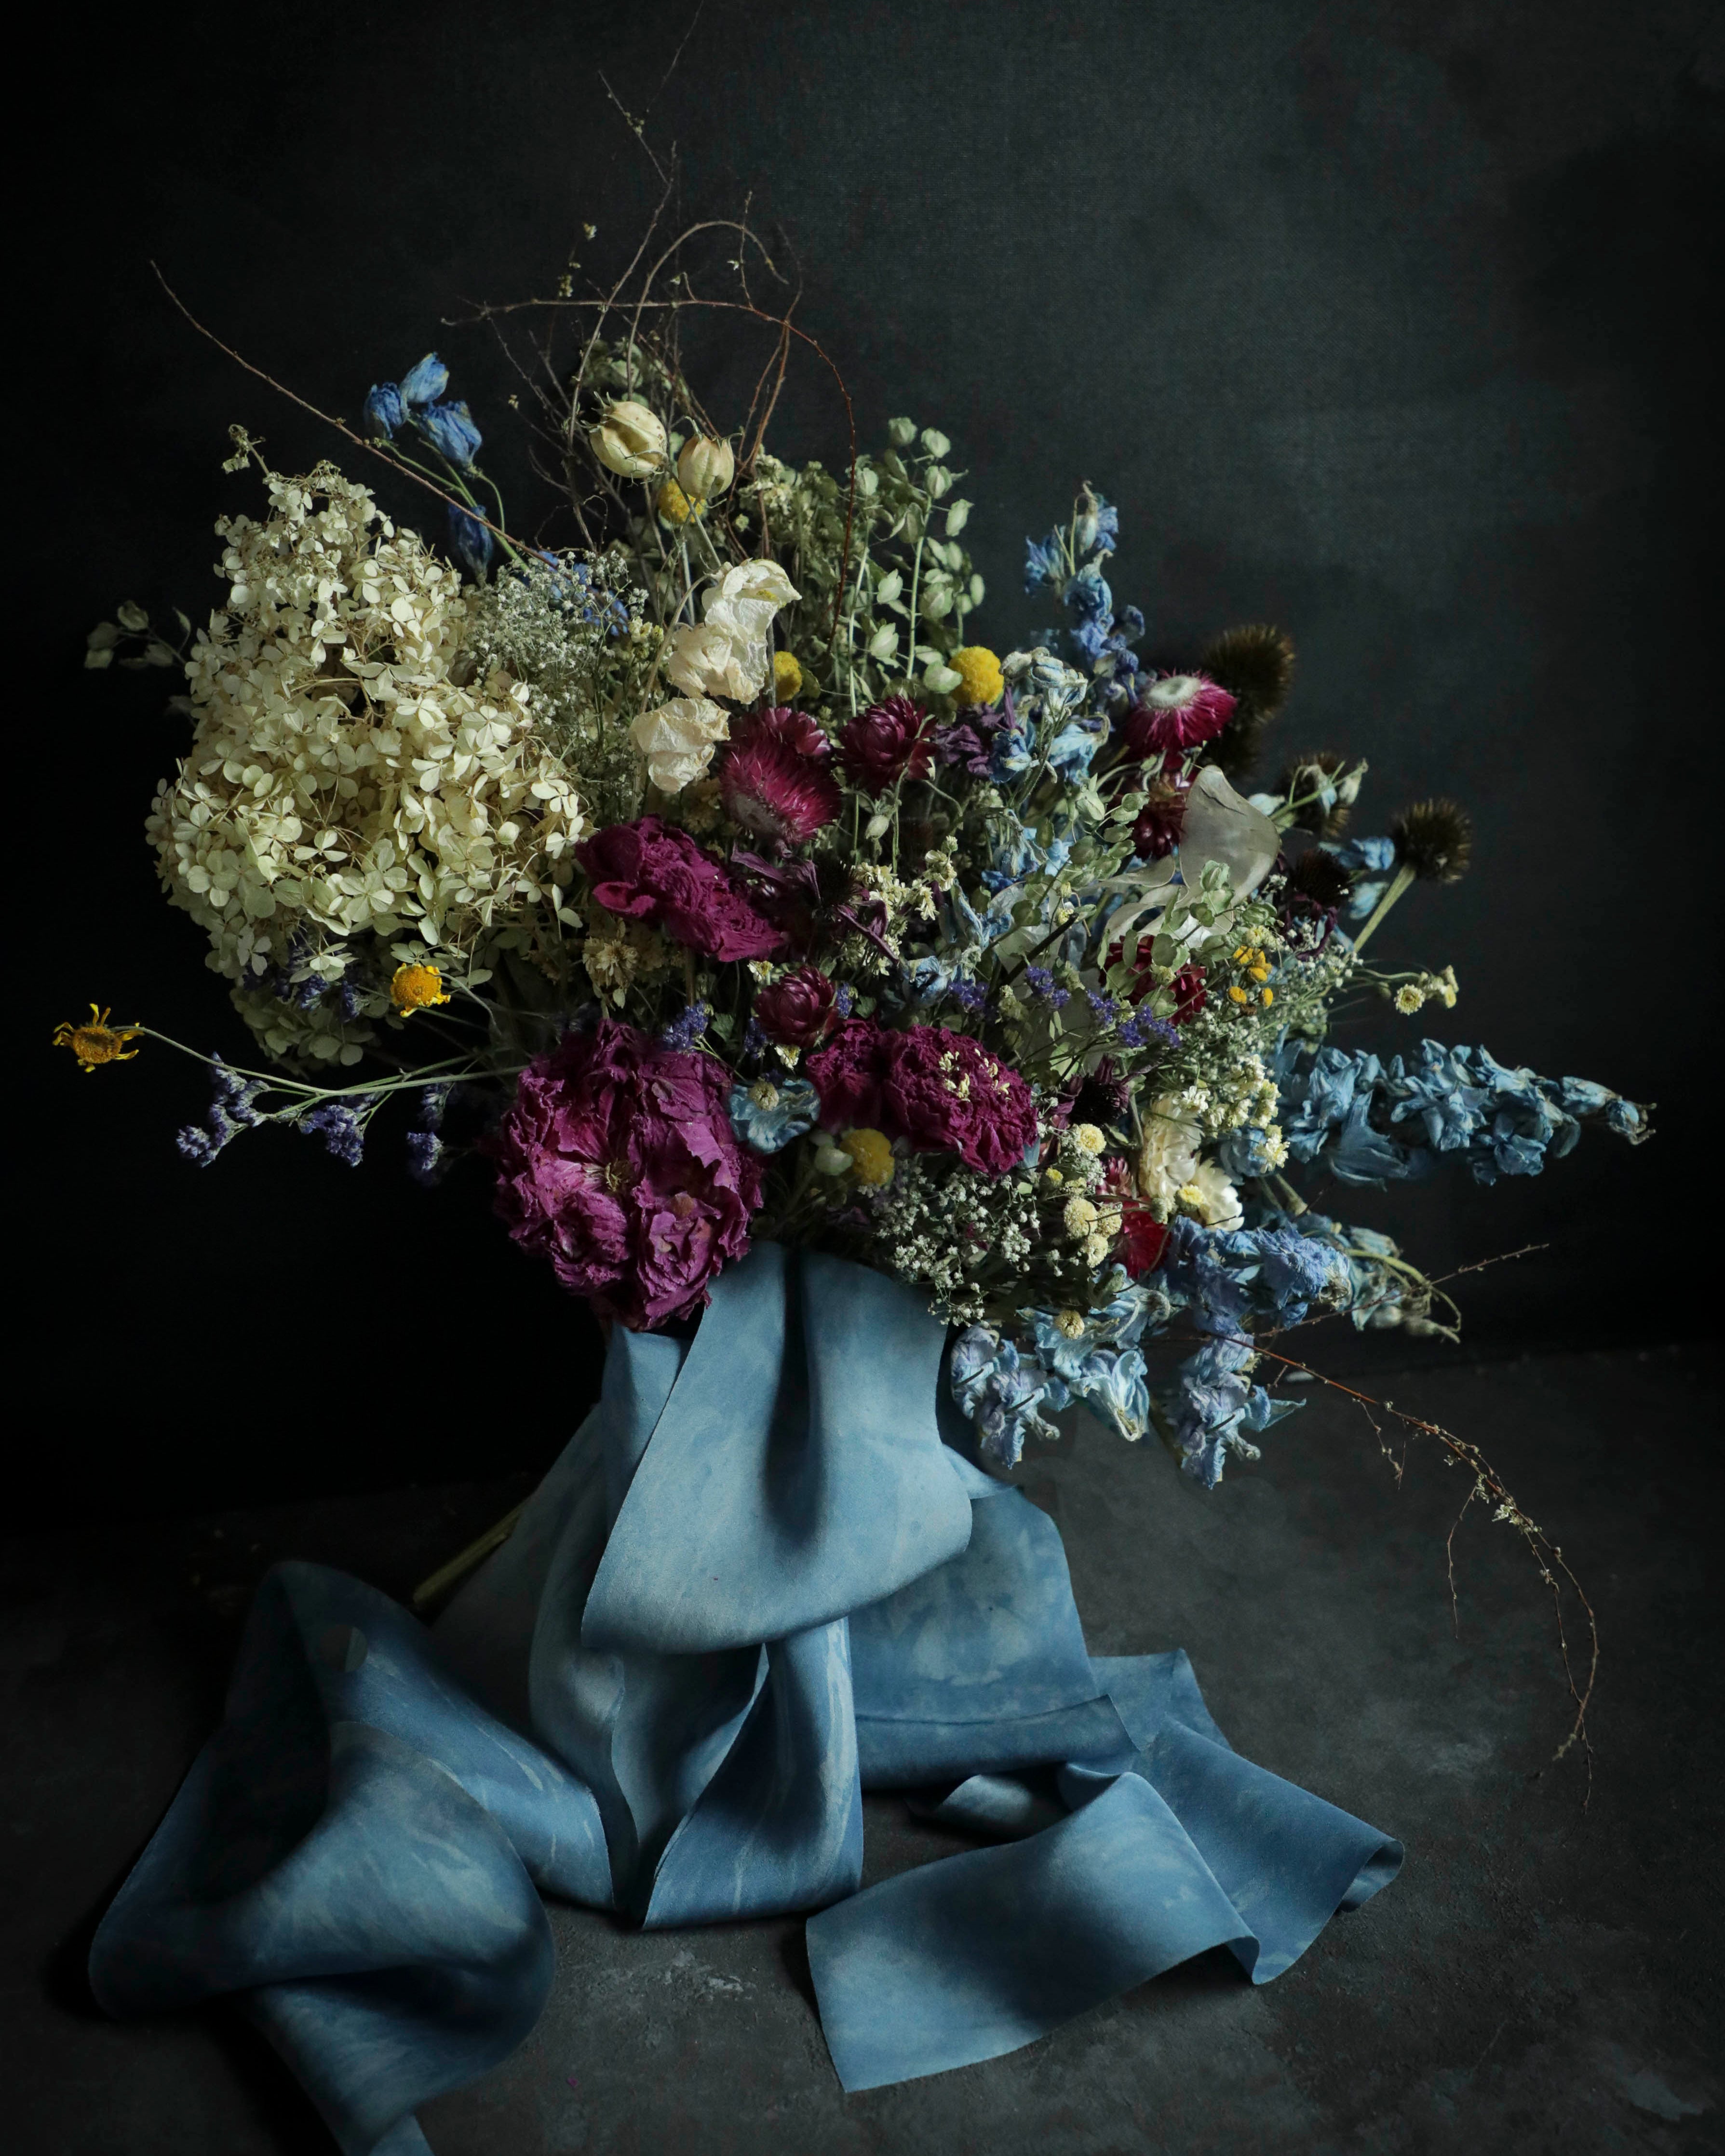 everlasting flower bouquet made of dried flowers and tied with silk and willow silk ribbons